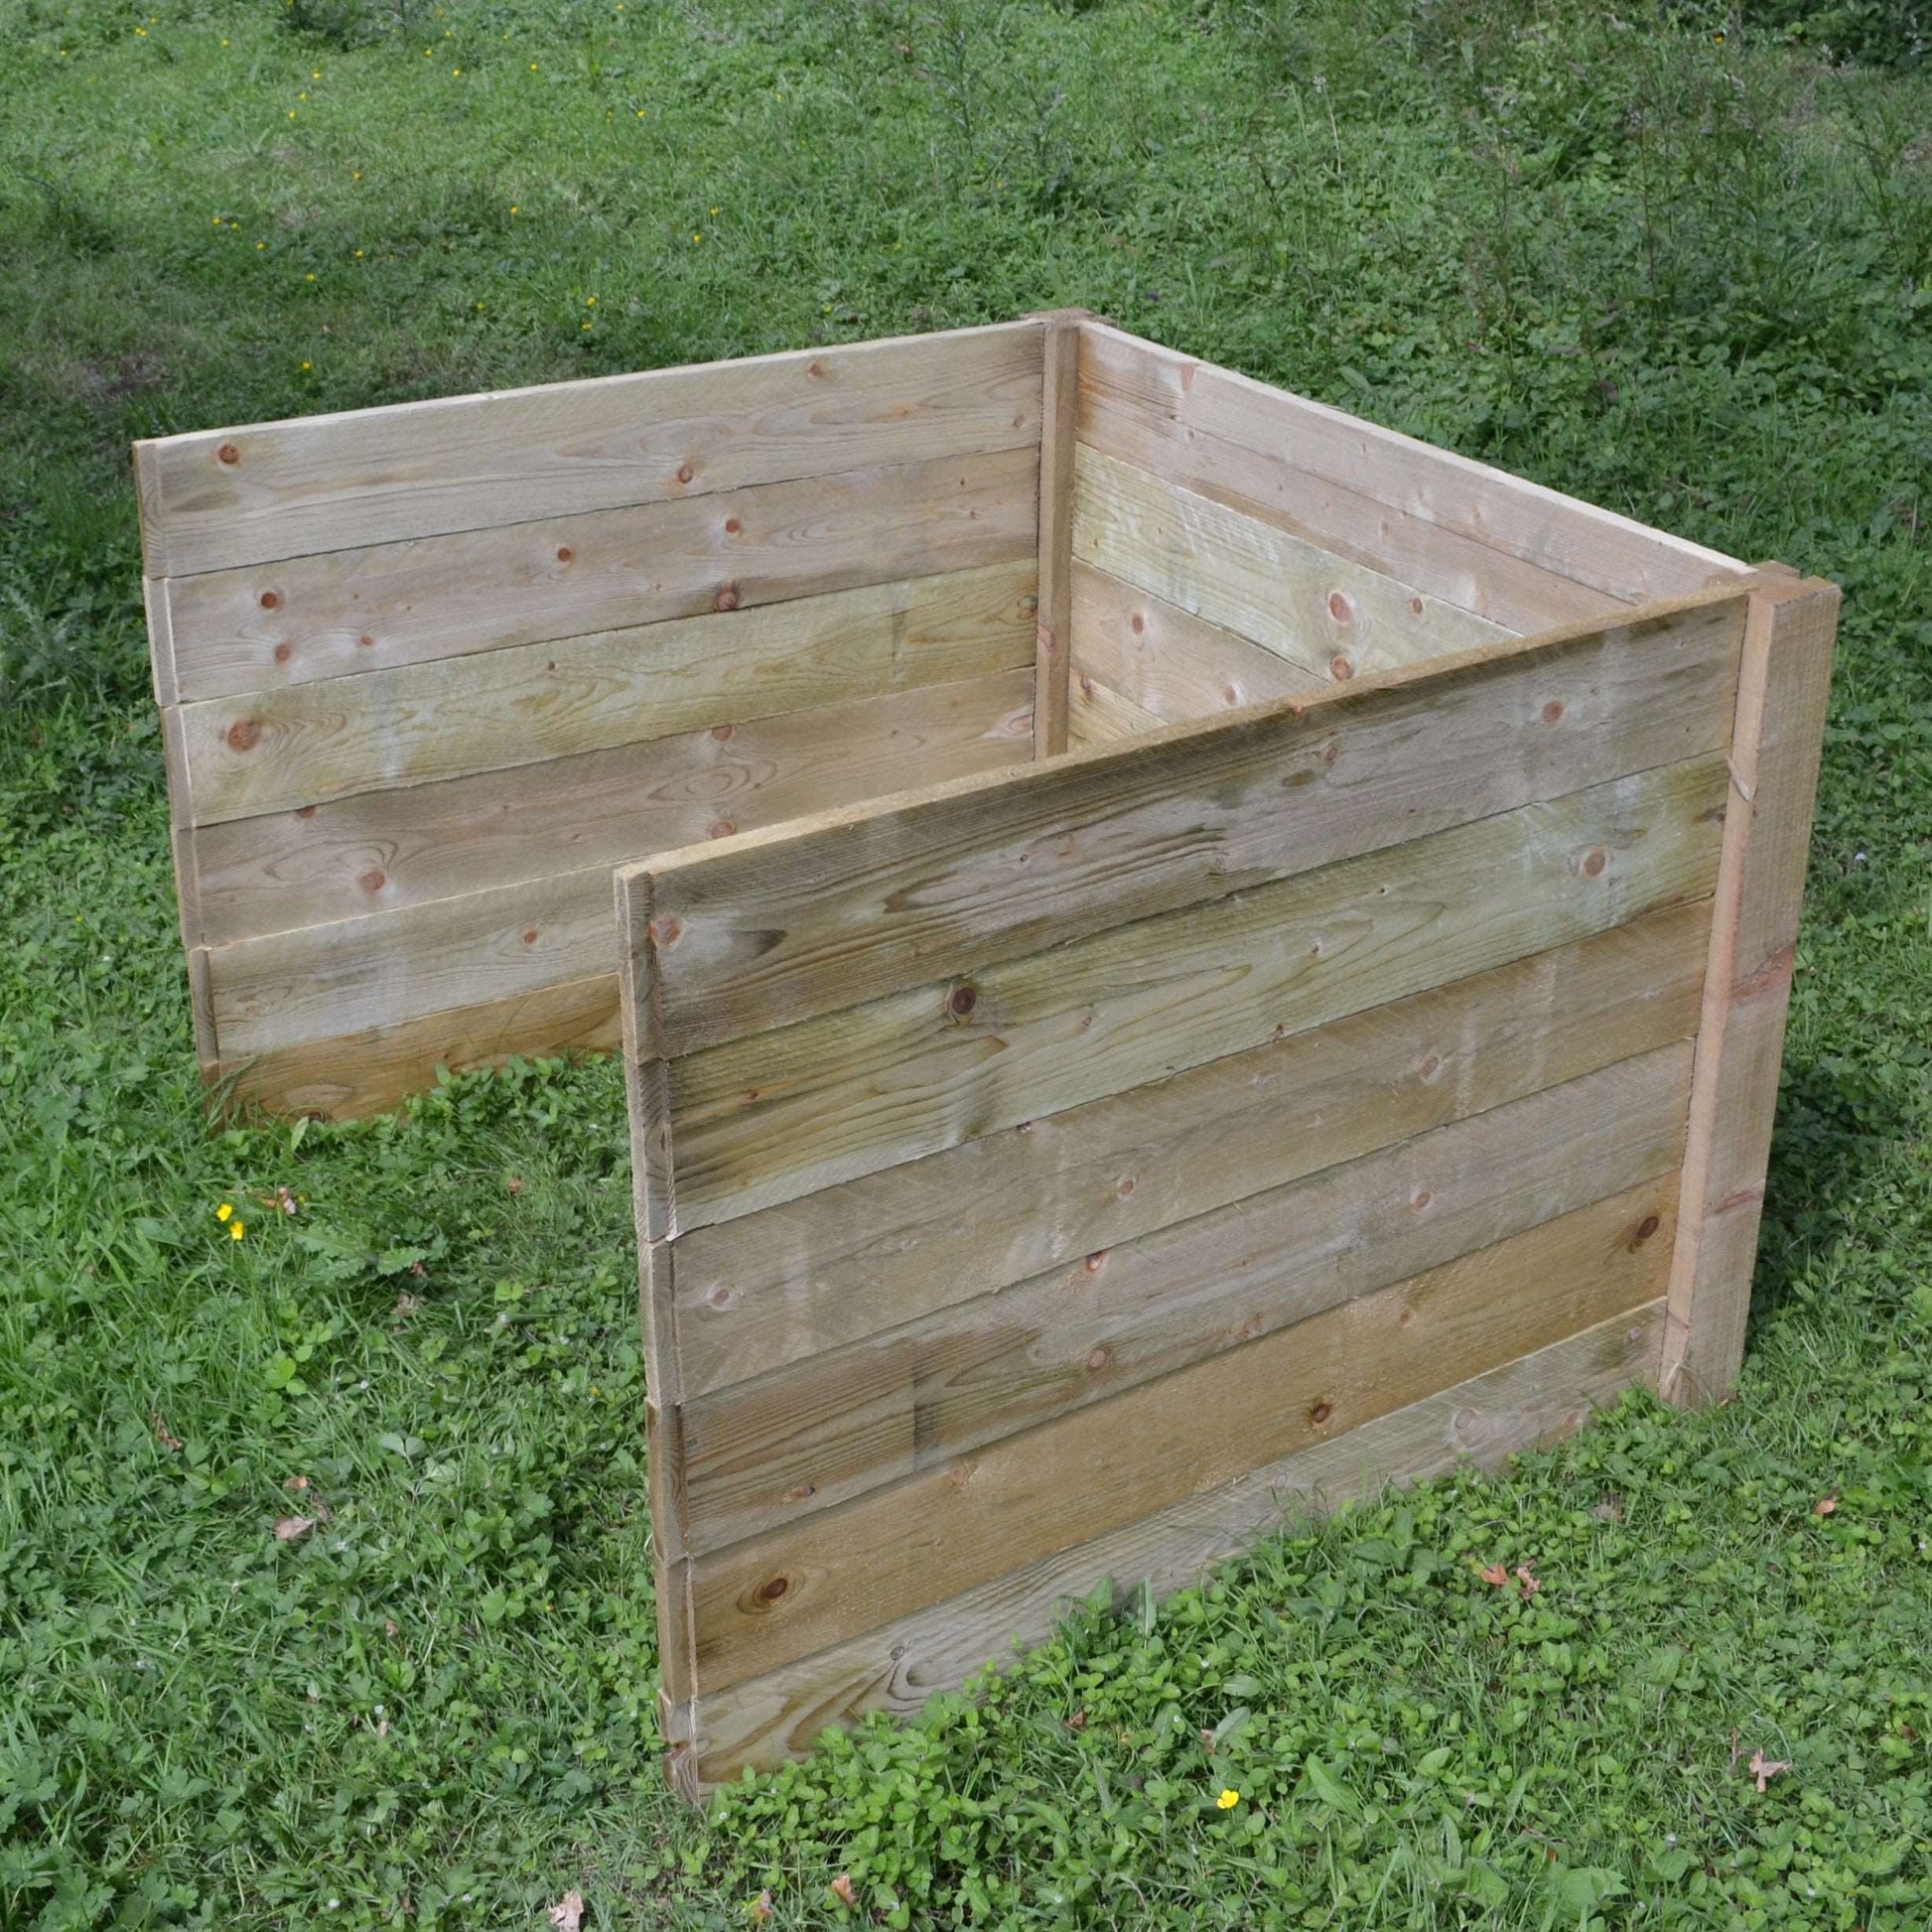 Add on bay compost bin front view